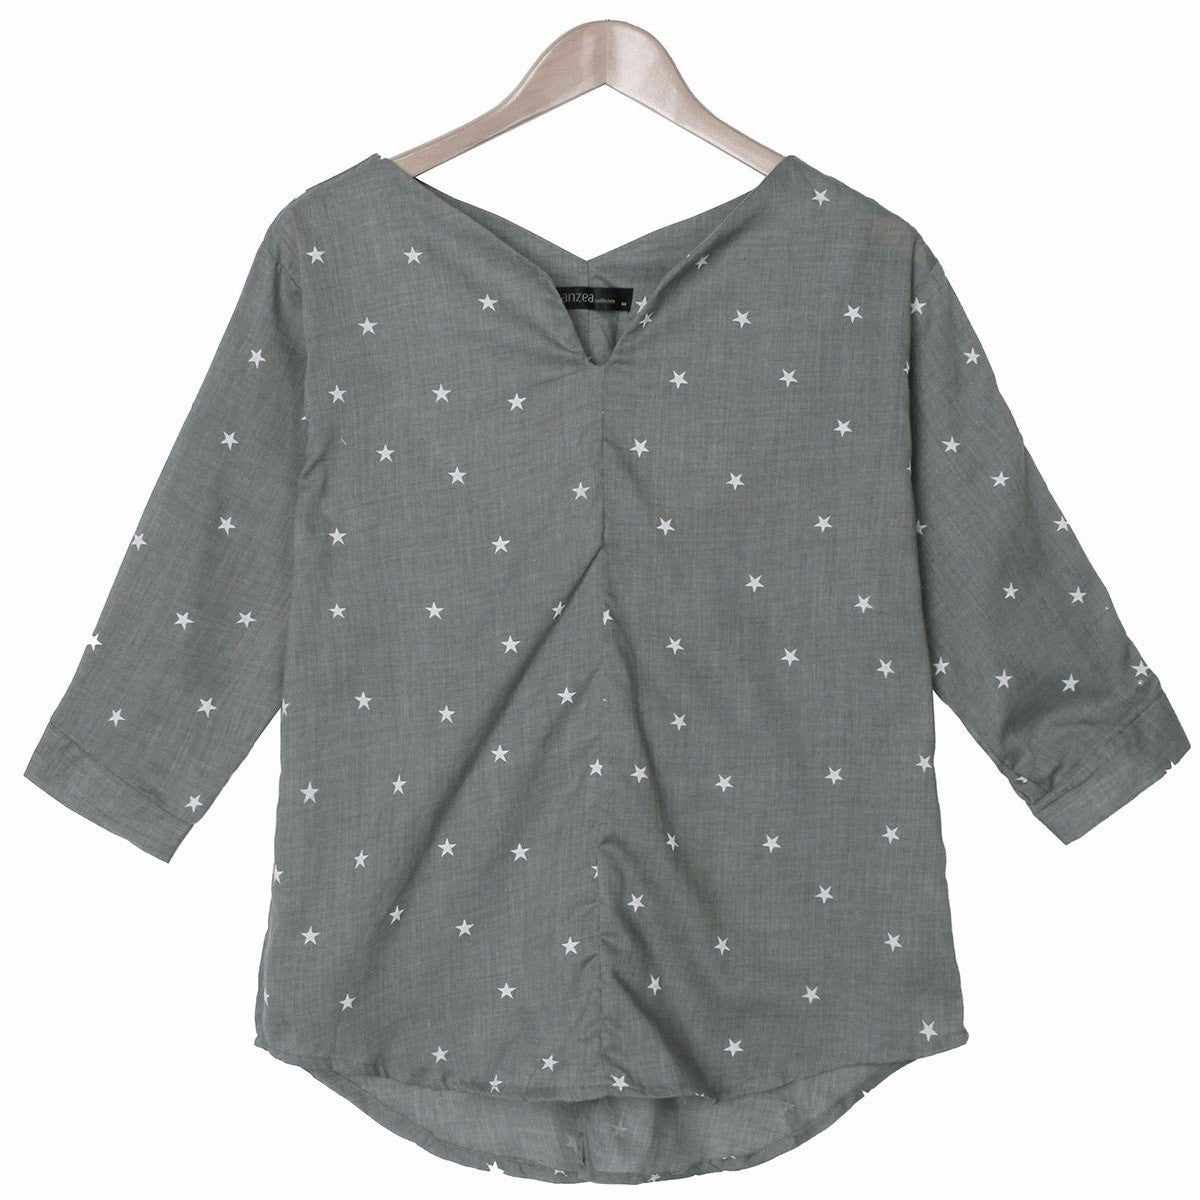 Women V-Neck 3/4 Sleeve Tops Casual Loose Star Printed Blouse Shirts Plus Size Shirts